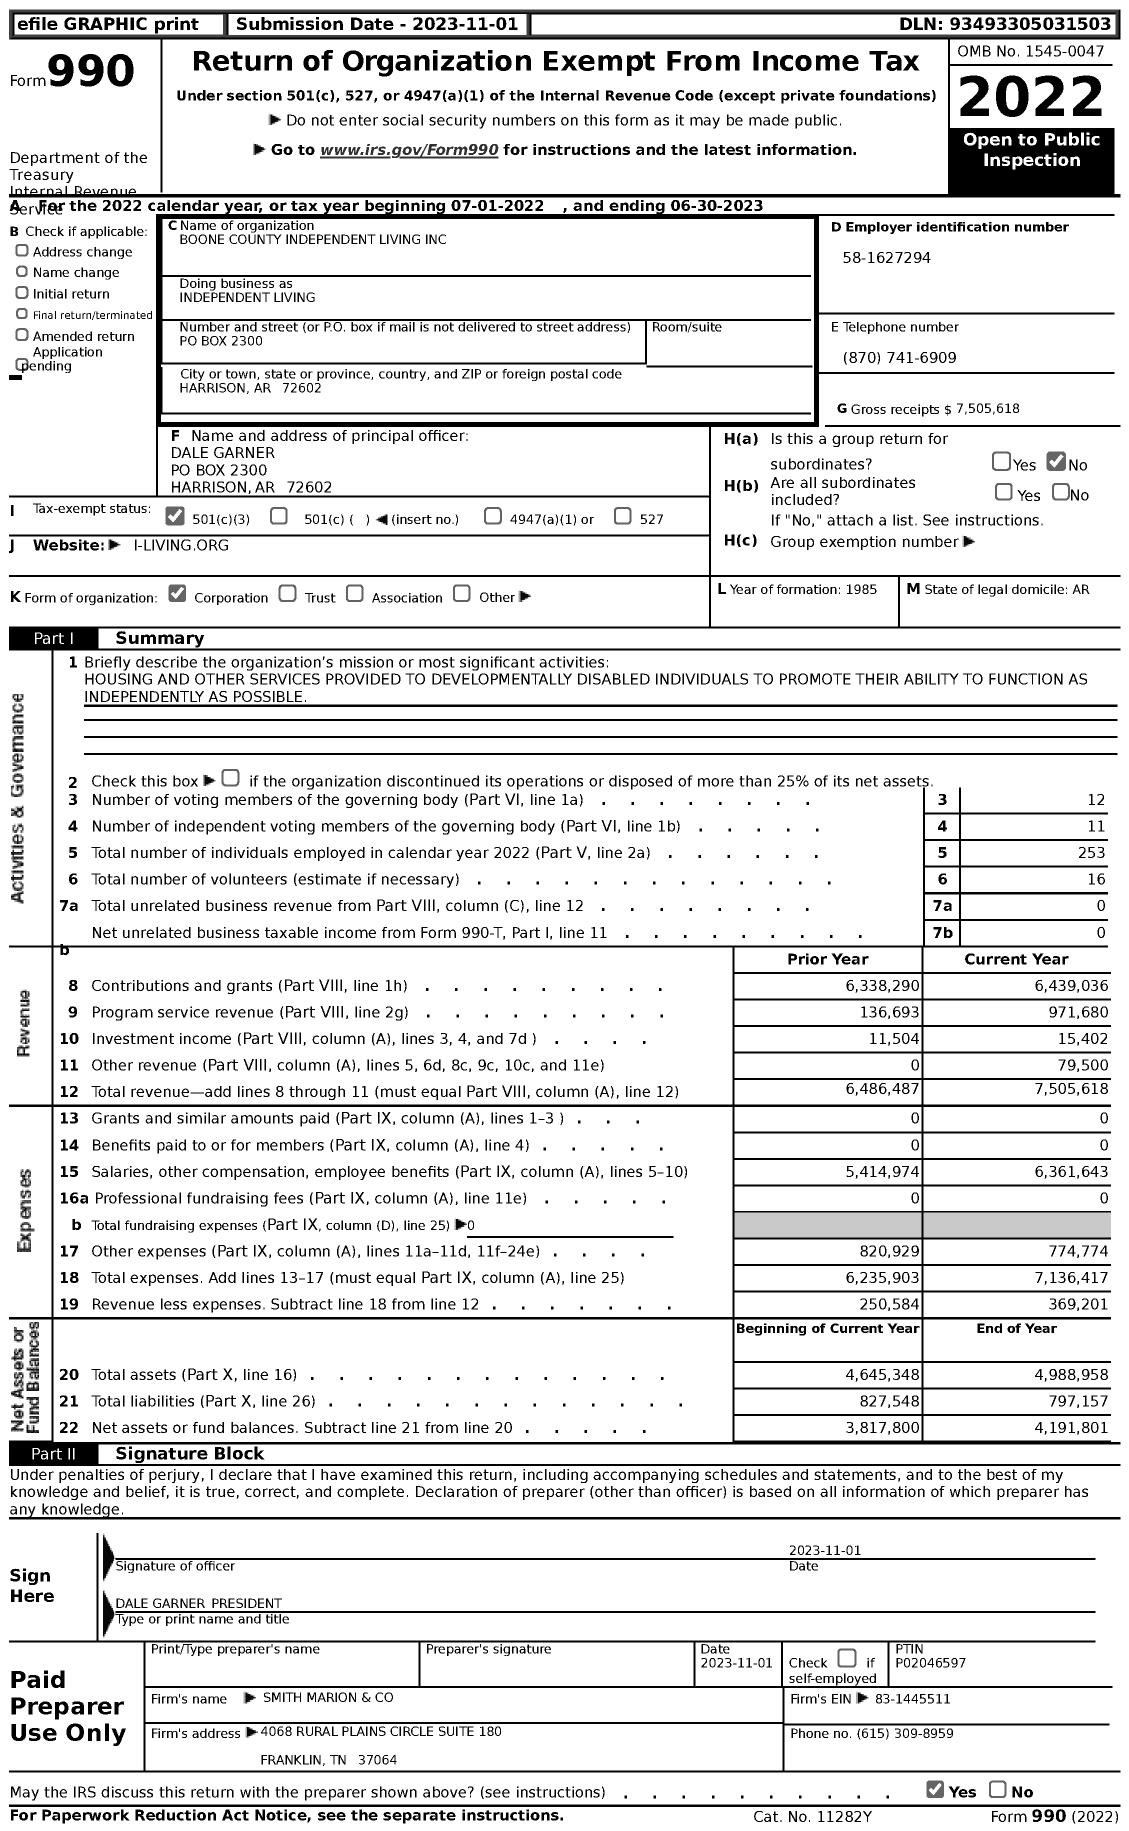 Image of first page of 2022 Form 990 for Independent Living / Boone County Independent Living Inc (ILI)